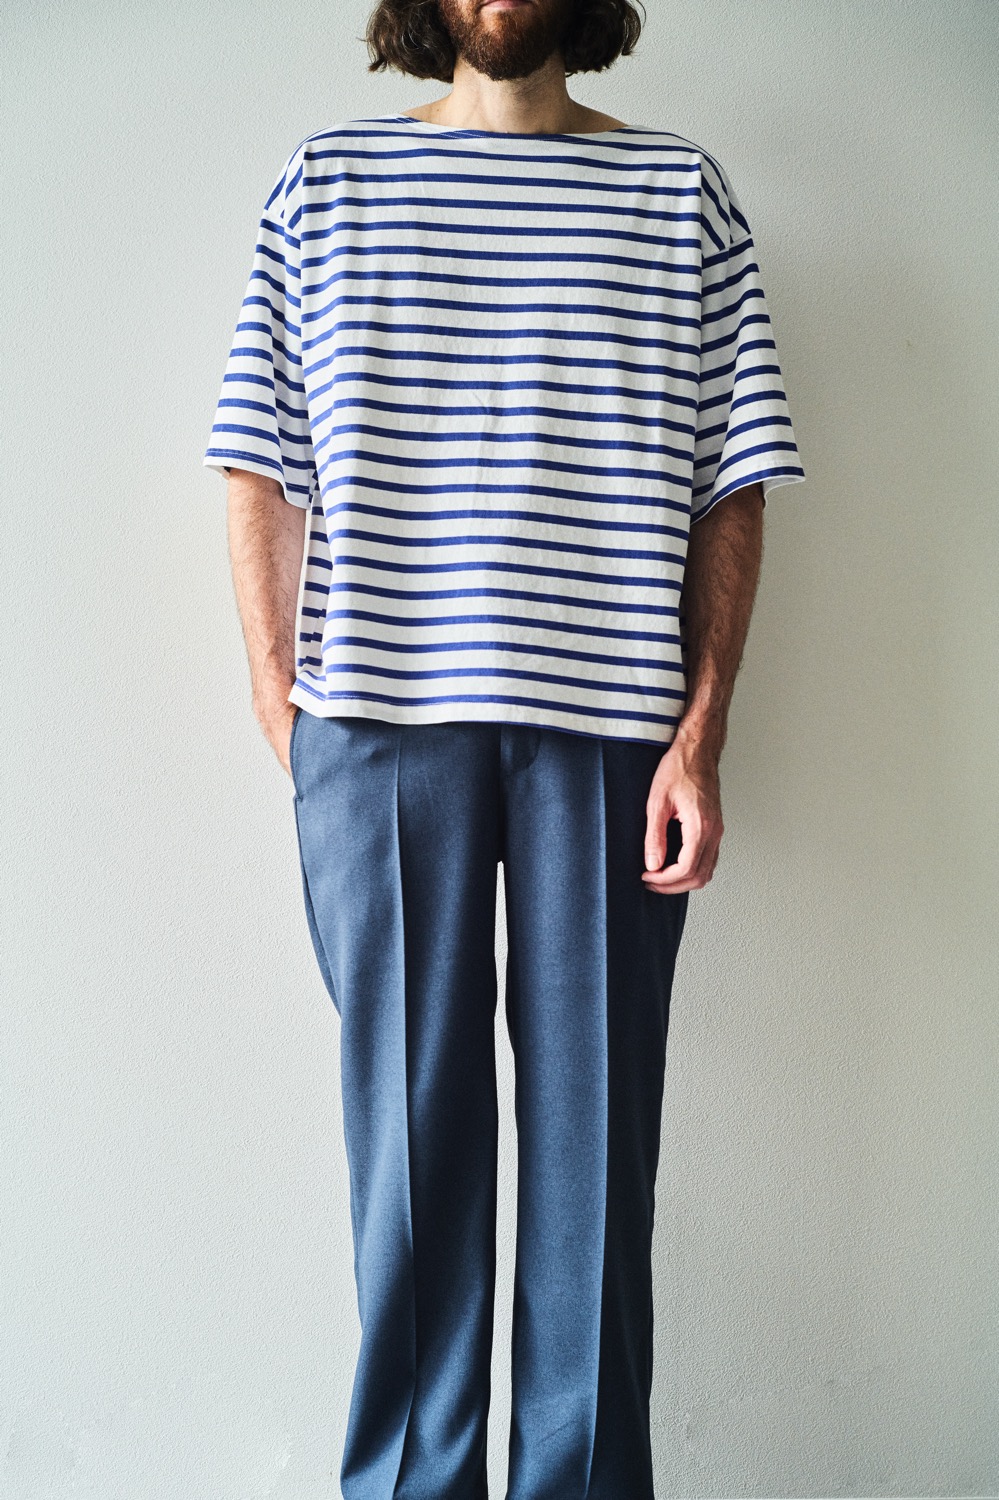 【2022 SPRING&SUMMER】Attick by Johnbull LOOK アイテム